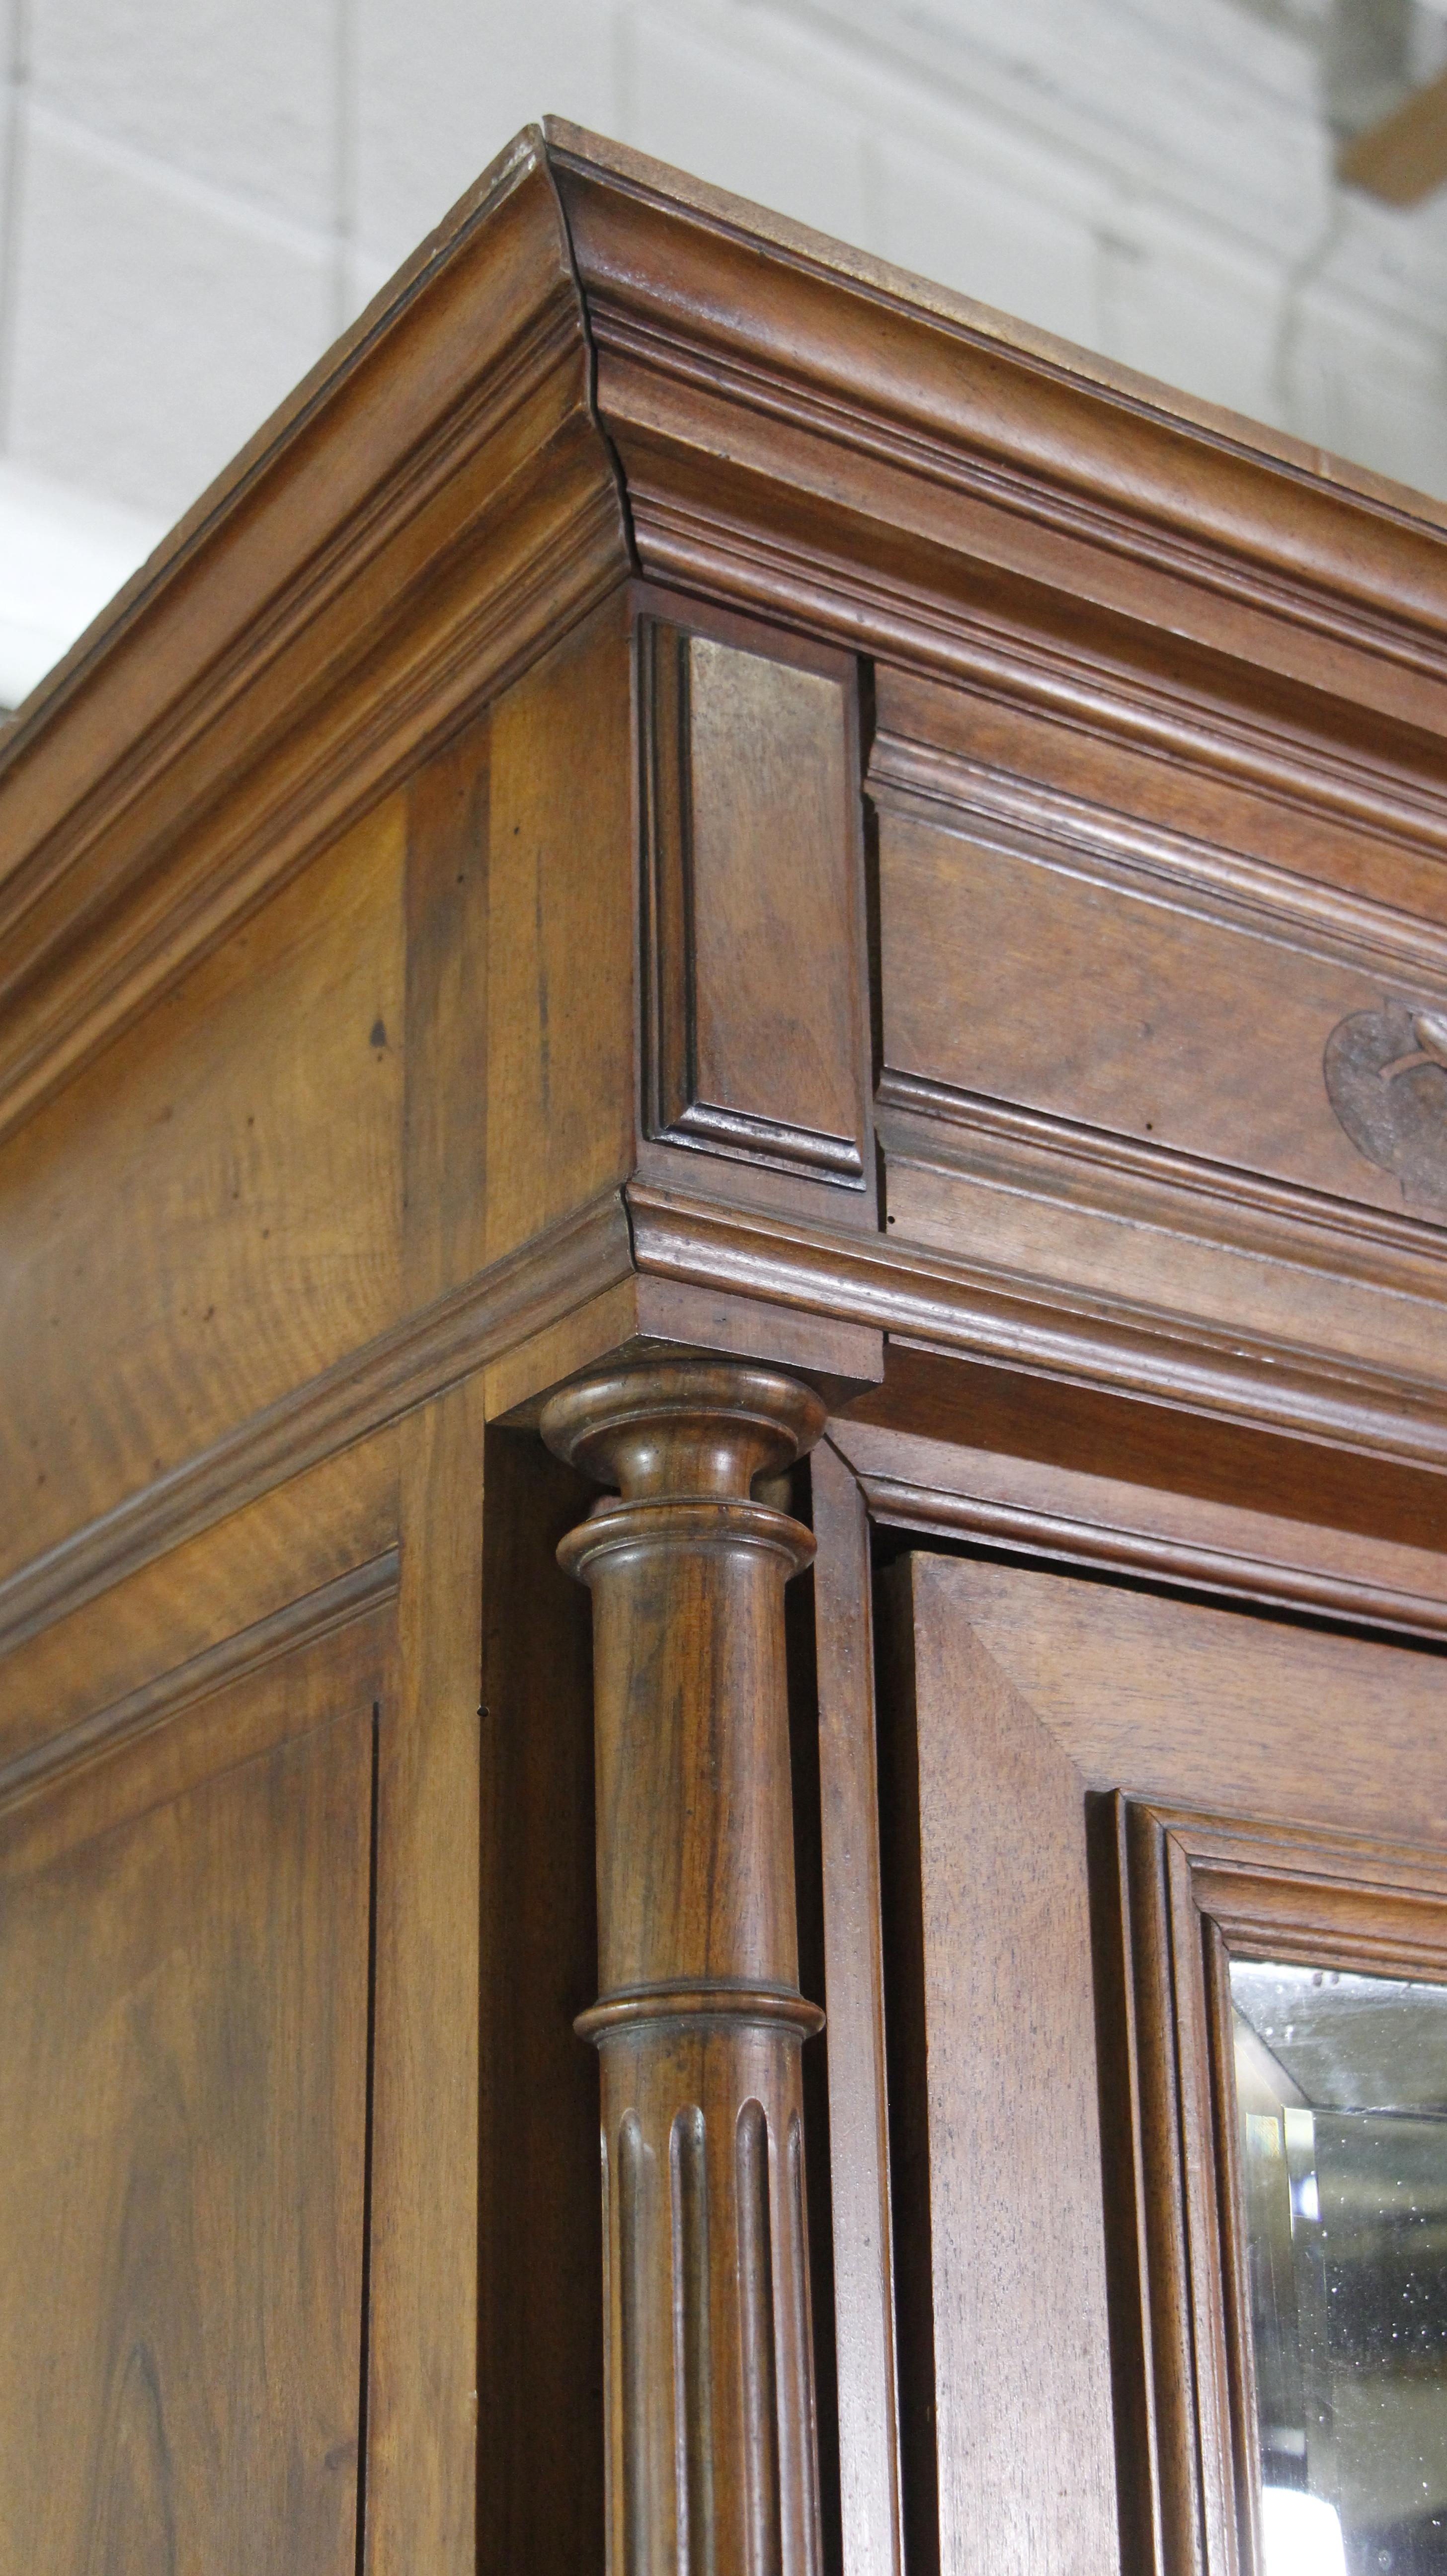 American 1930s Walnut Armoire Carved Details W/ 7 Shelves Small Drawer and Beveled Mirror